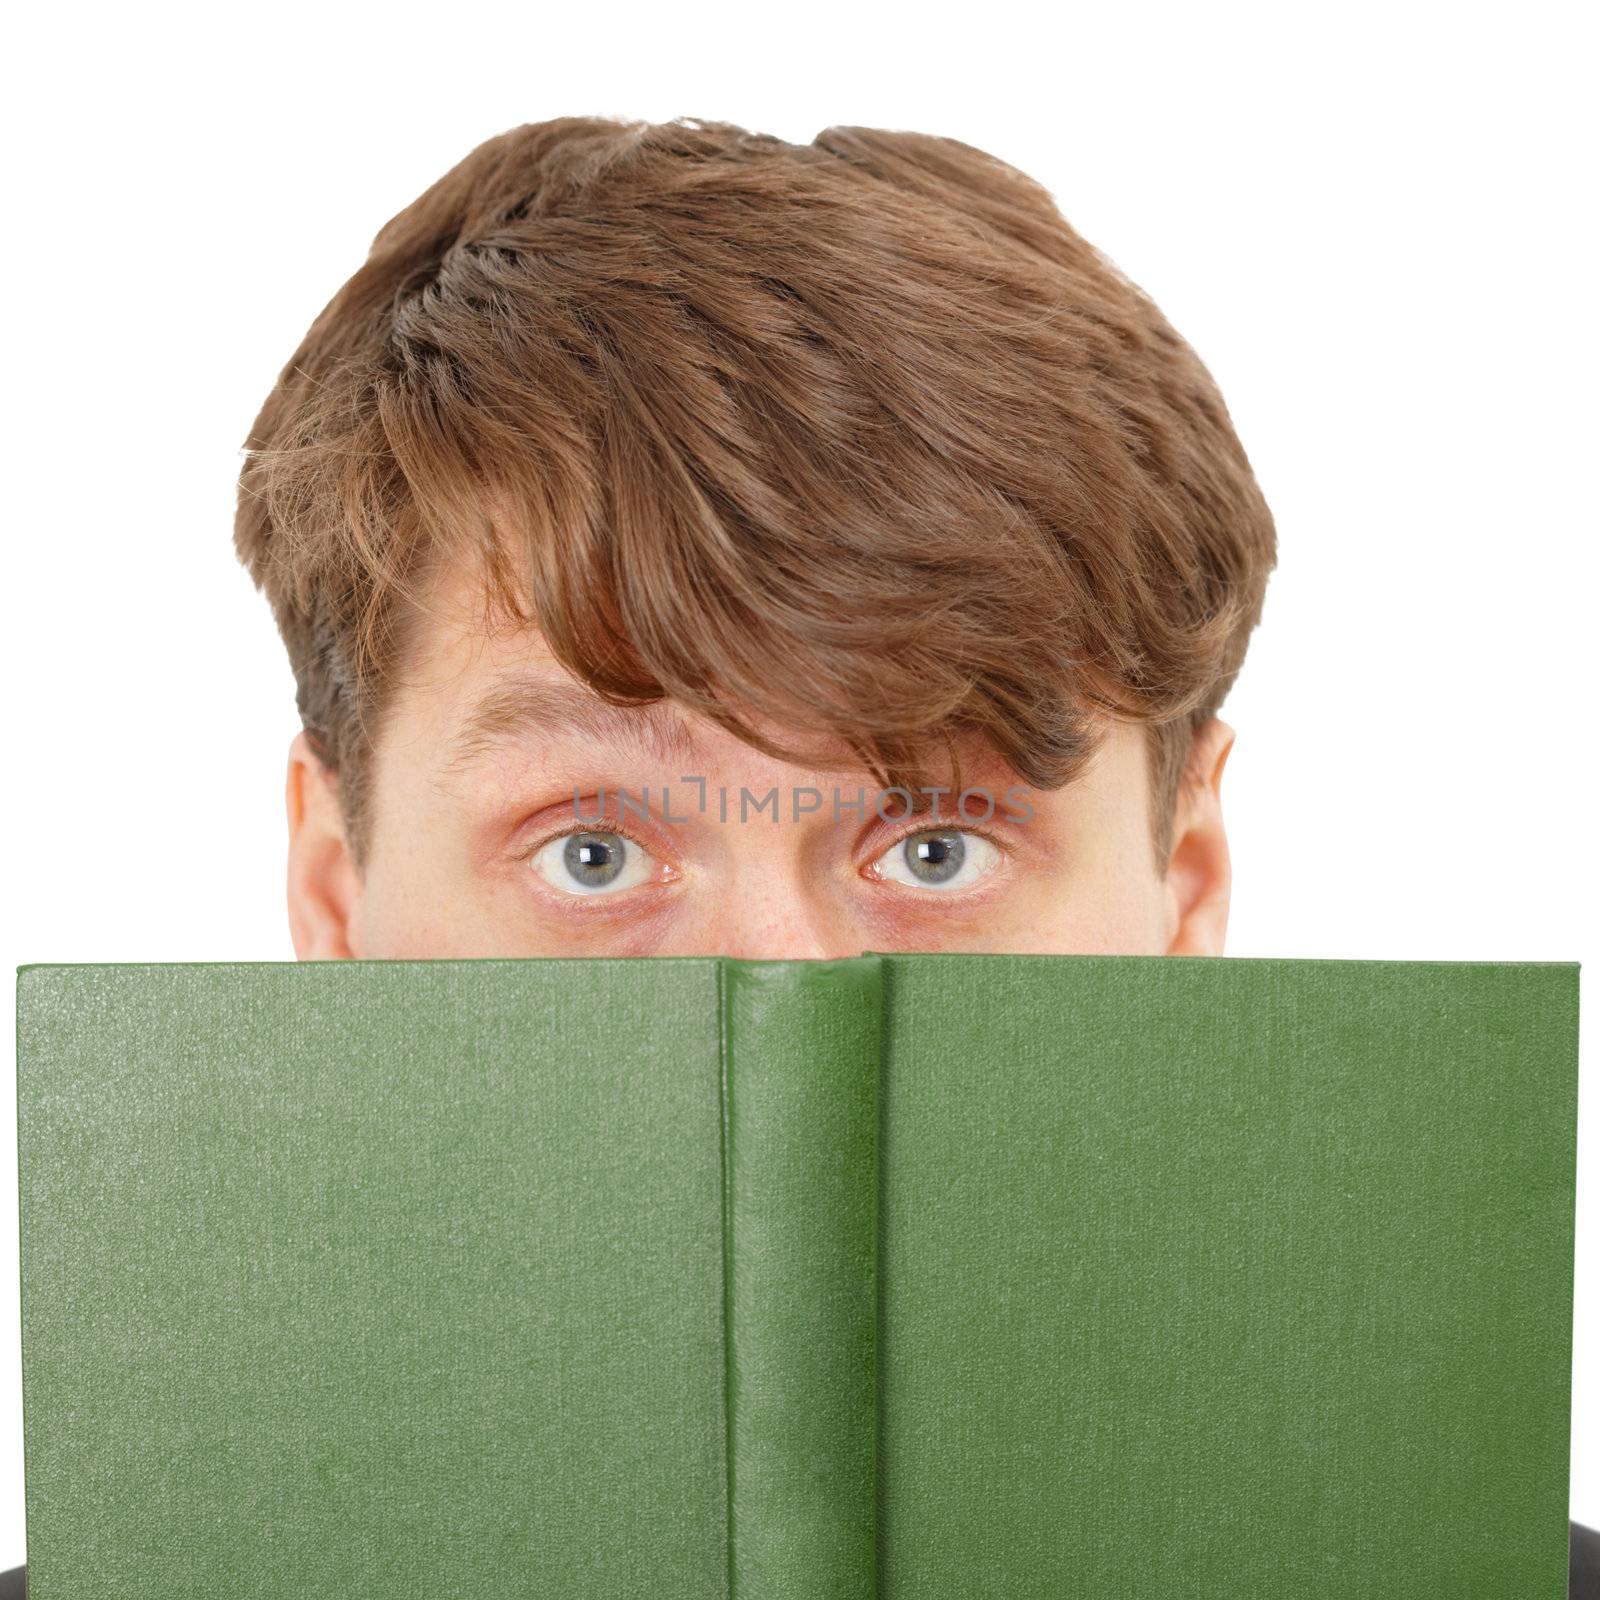 The young man hid his face behind a green book, close-up on a white background